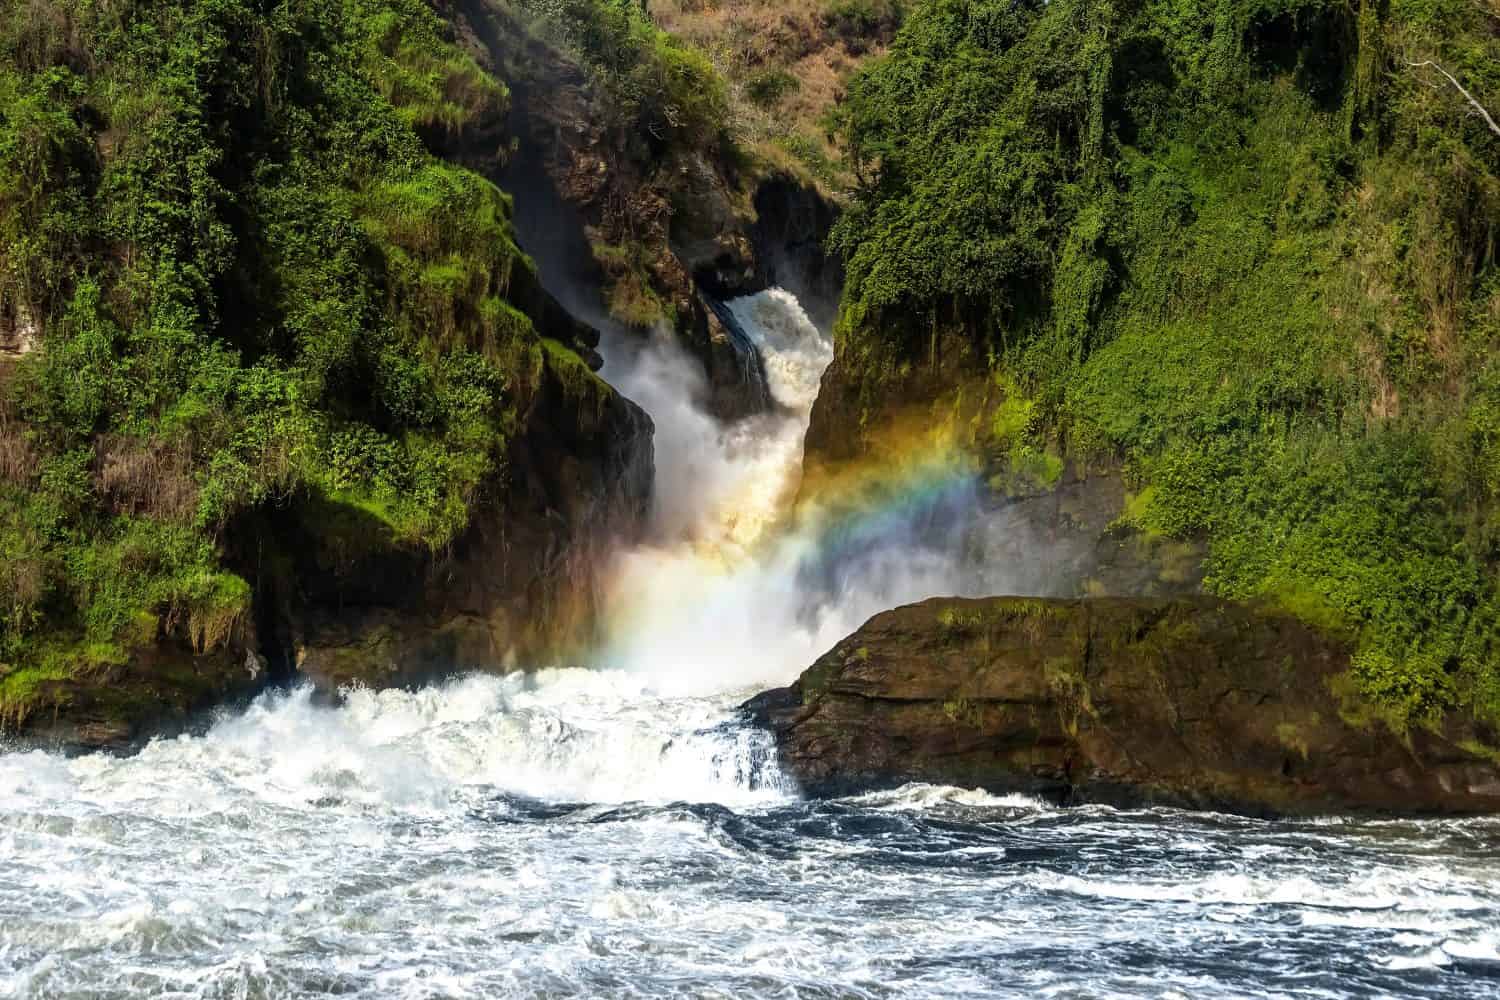 A rainbow over the Murchison waterfall on the Nile river. Murchison falls national park, Uganda.